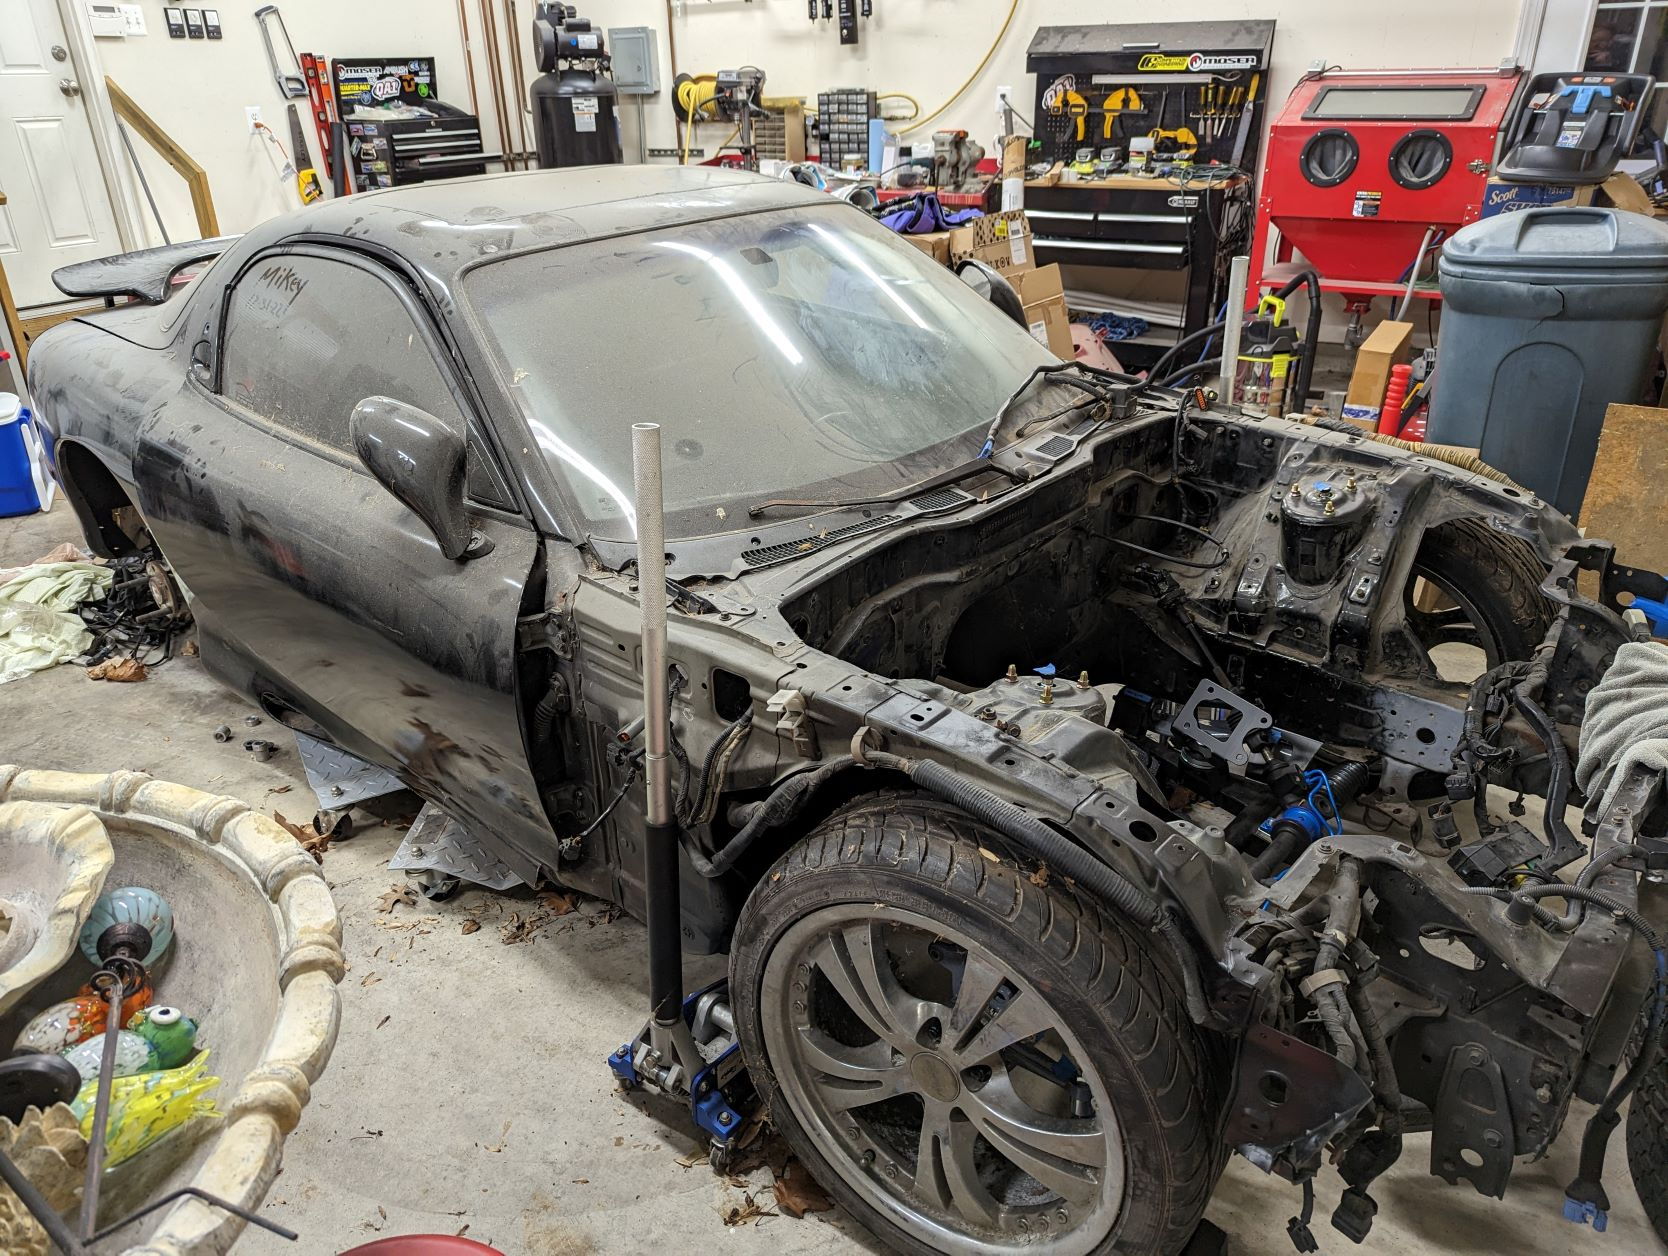 1993 Mazda RX-7 - 93 RX7 Rolling Chassis - with 9" straight axle, cage, completed suspension, more - Used - VIN JM1FD3318P0209968 - Black - Prince Frederick, MD 20678, United States